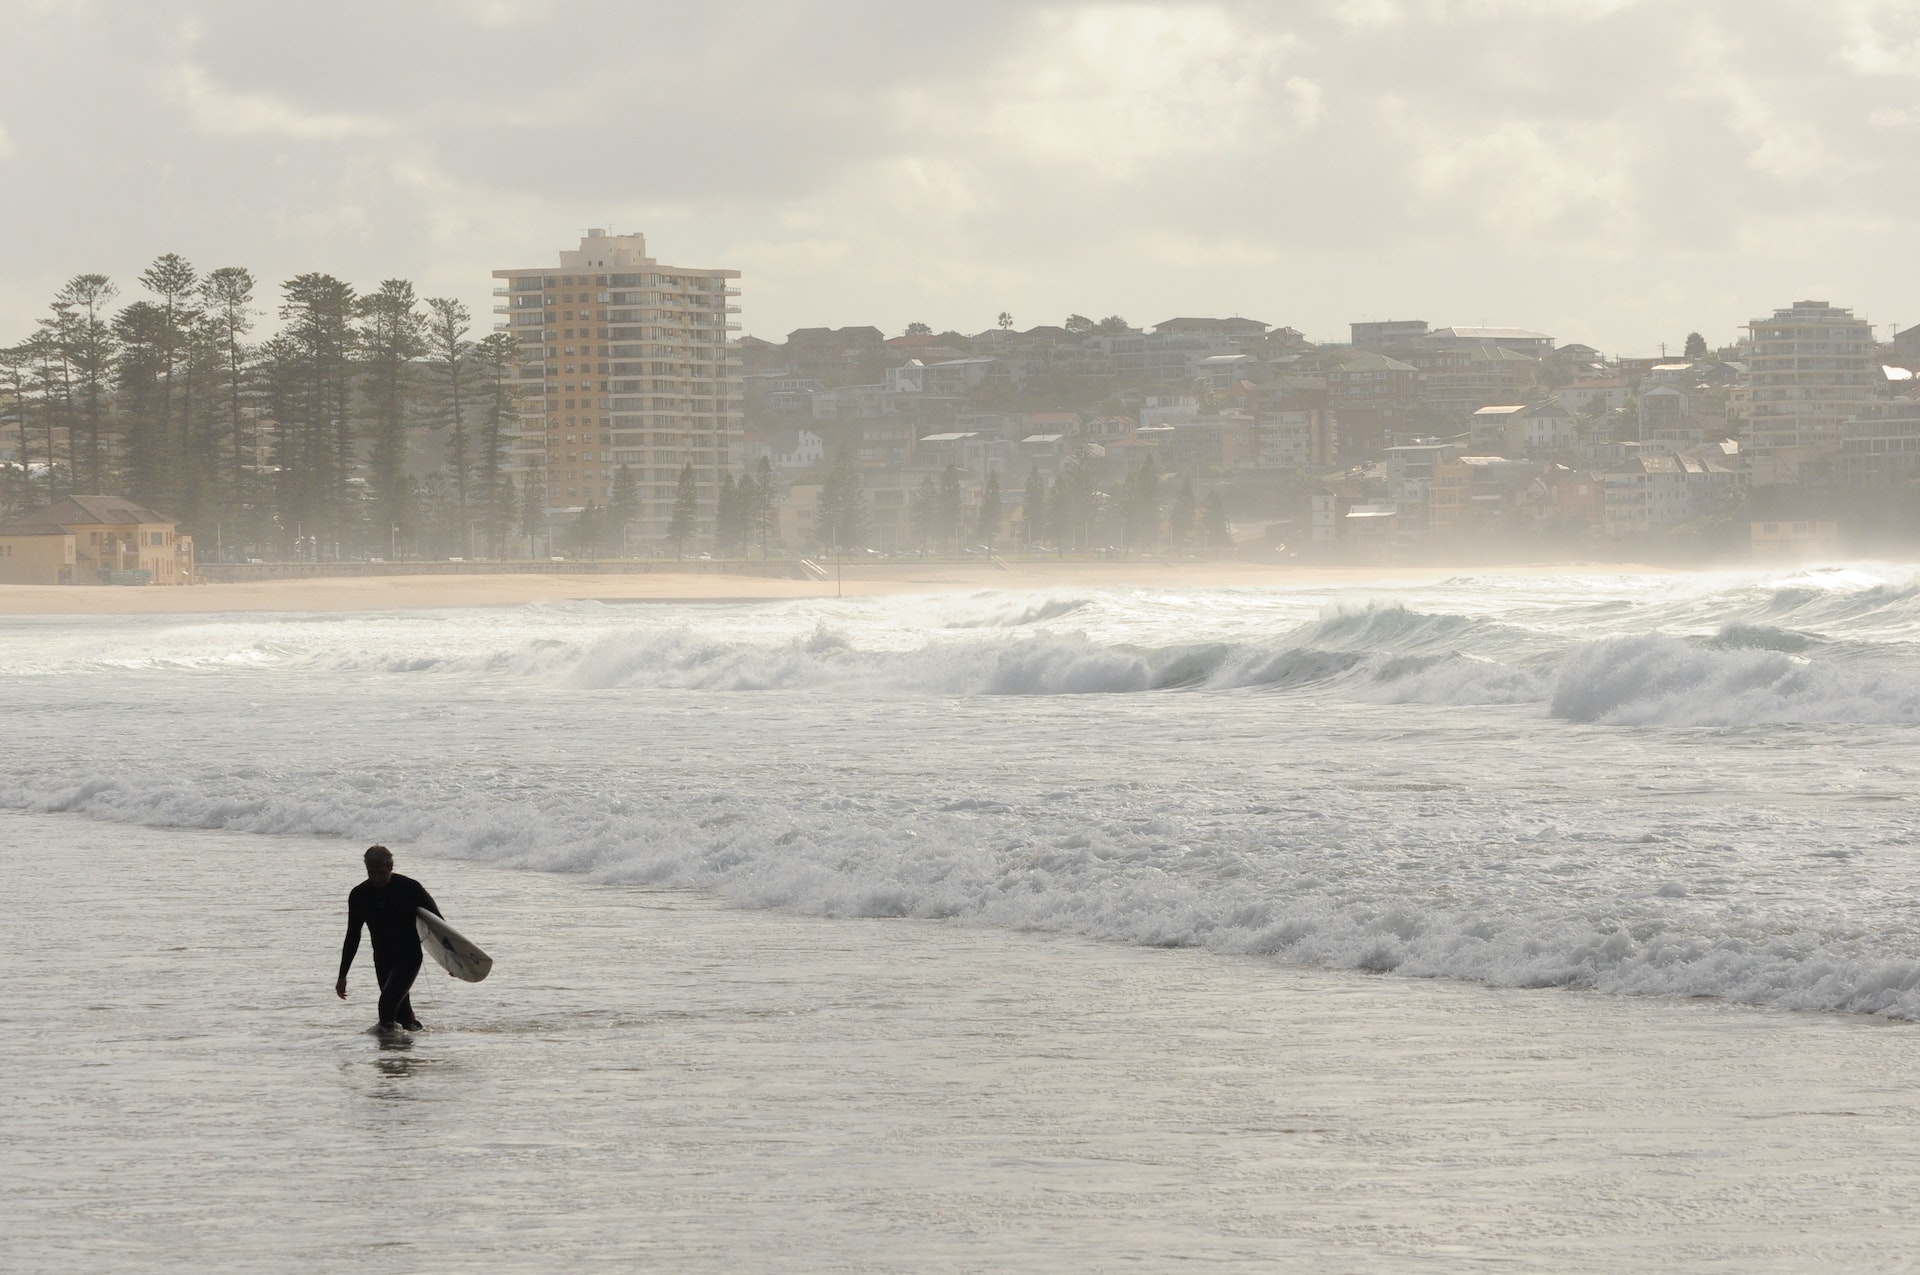 Surfer coming out of the water at Manly Beach, Sydney, New South Wales, Australia